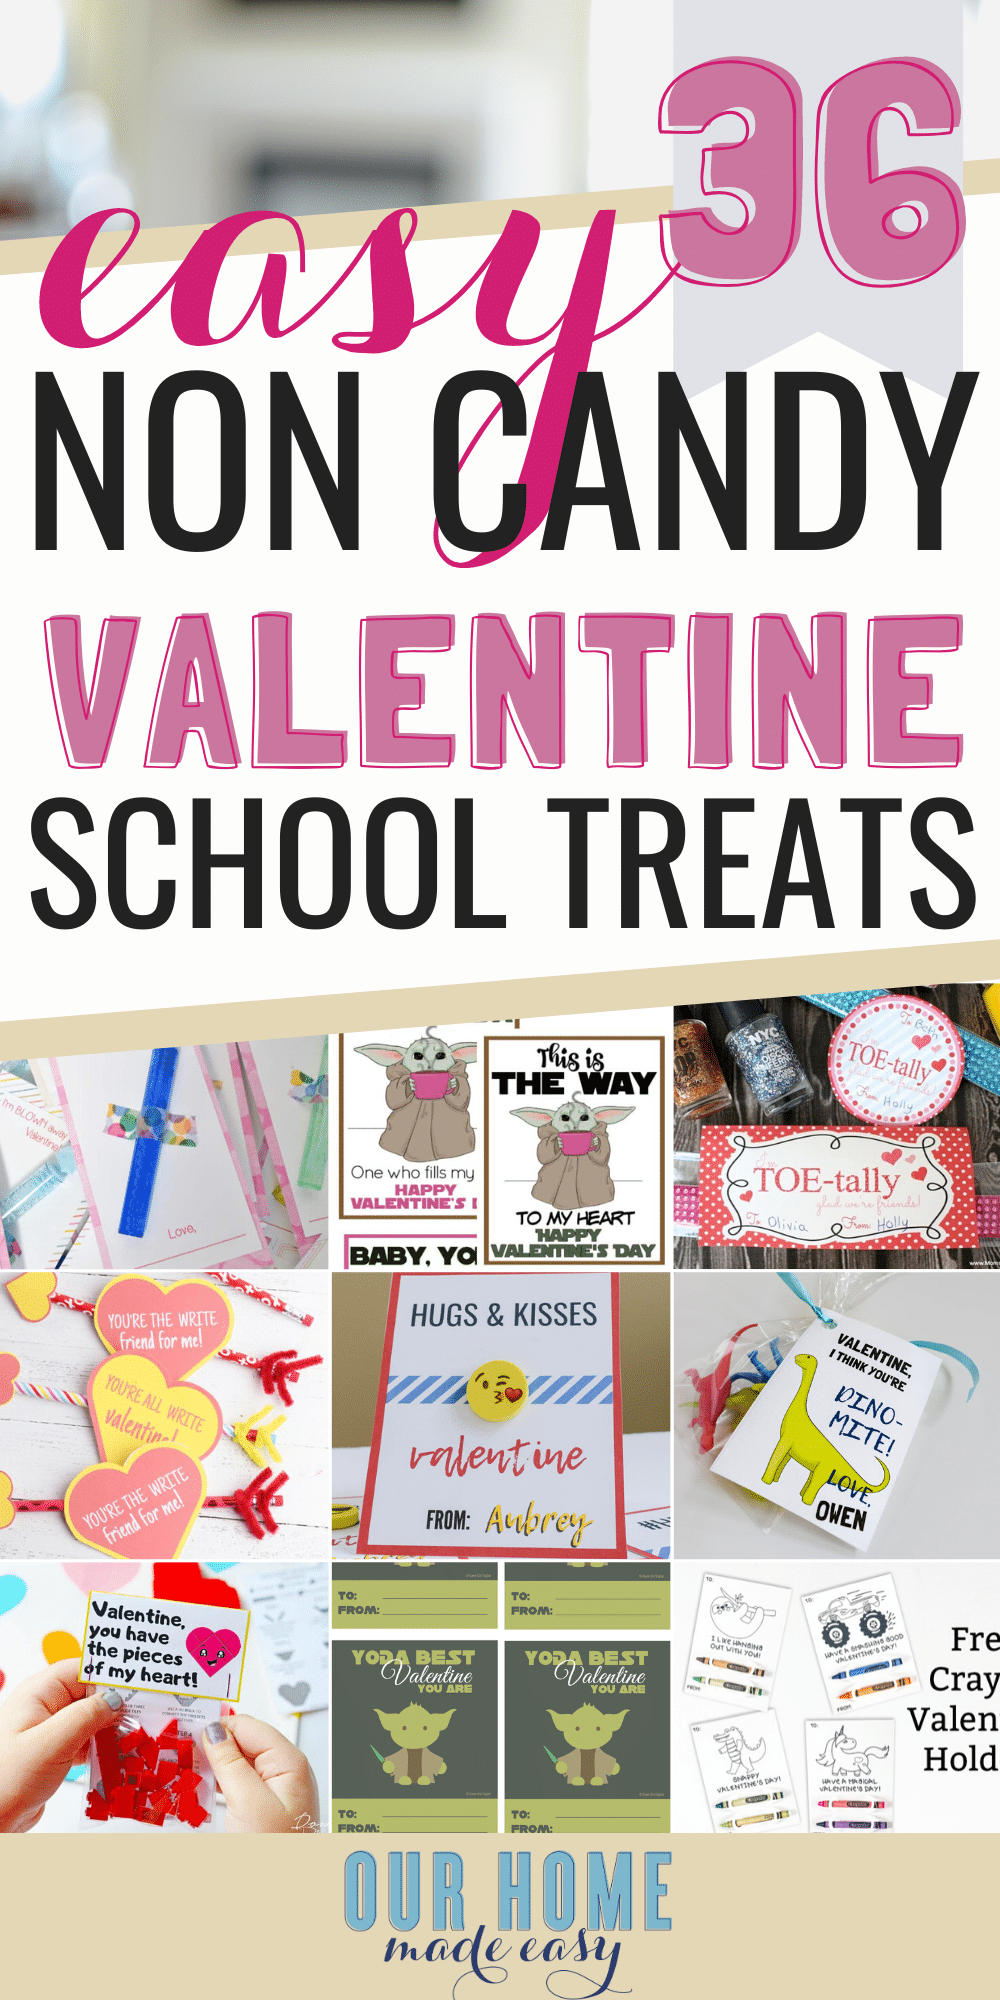 36 Easy Non-Candy Kids Valentines for School: Perfect Valentine's Day treats for school that don't involve any candy!